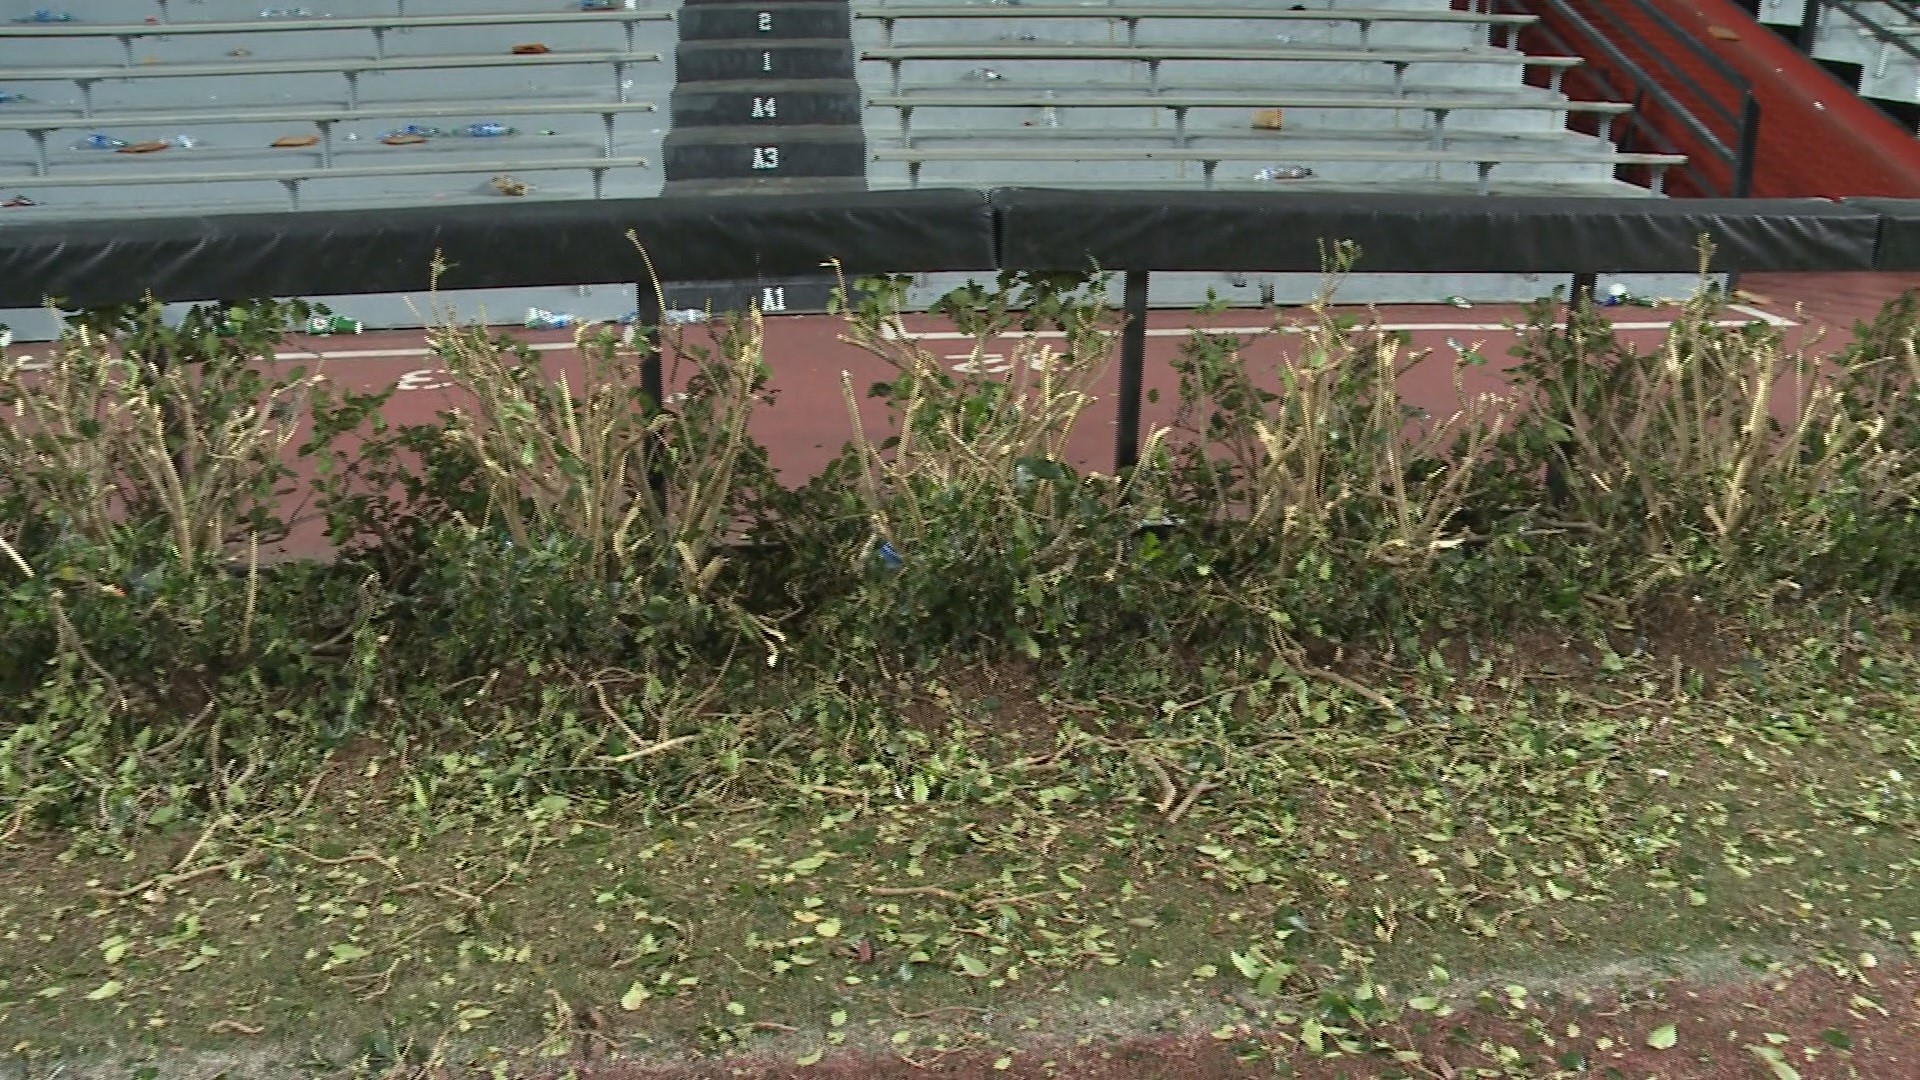 The hedges that line the end zones of Williams-Brice Stadium will need to be replaced after getting torn up by USC fans after the team's win against the Vols.